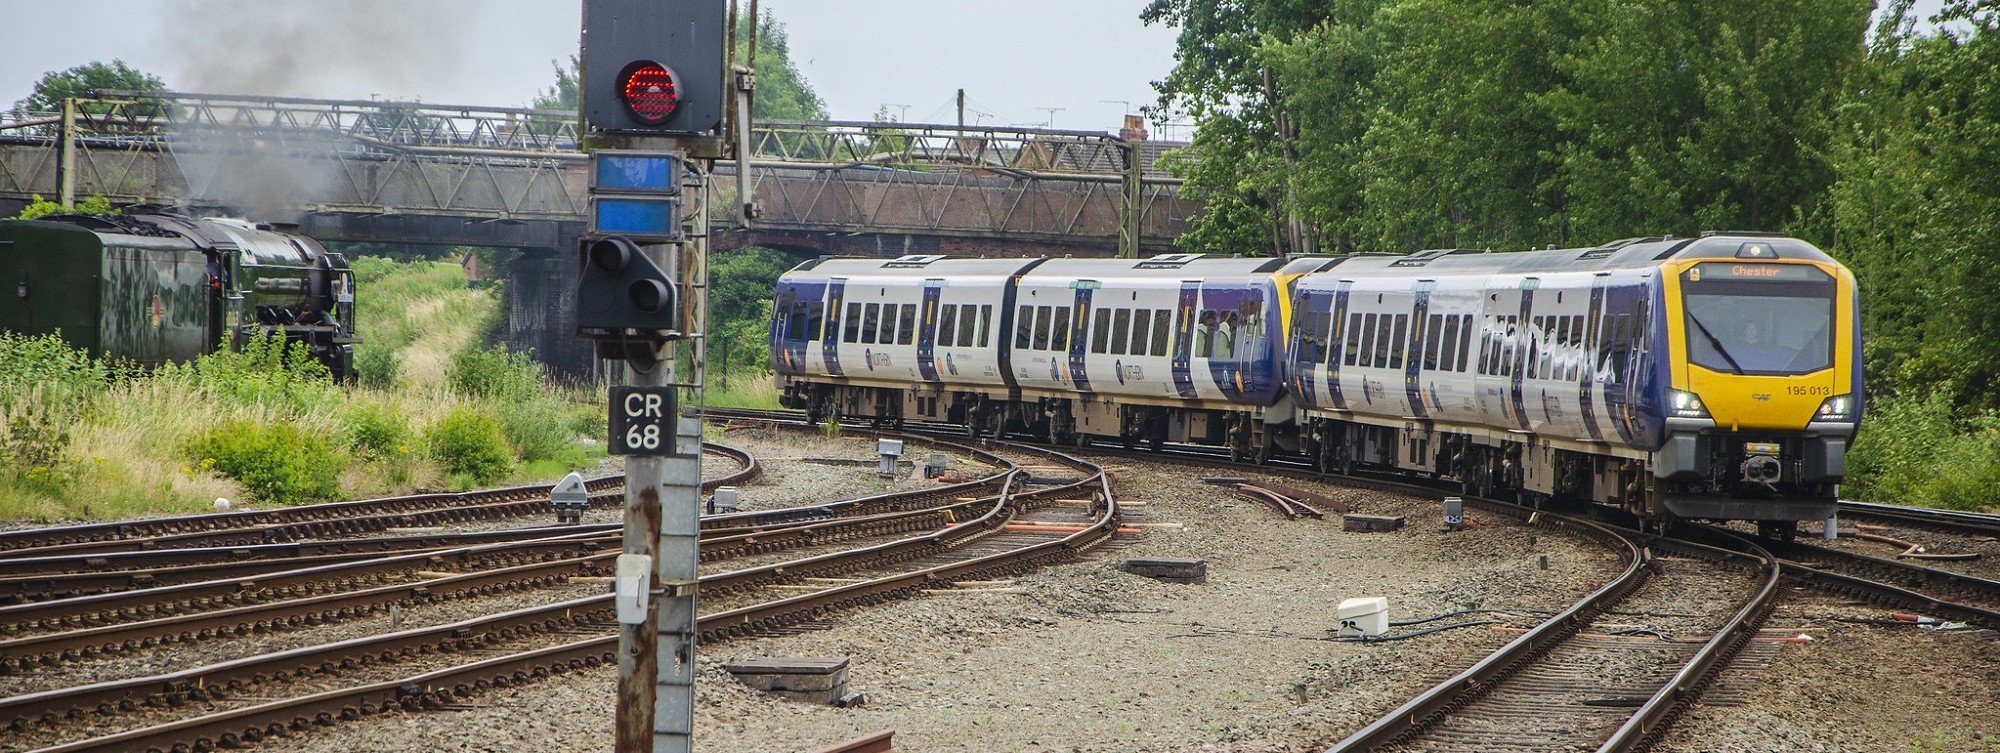 image-shows-northern-train-heading-to-chester